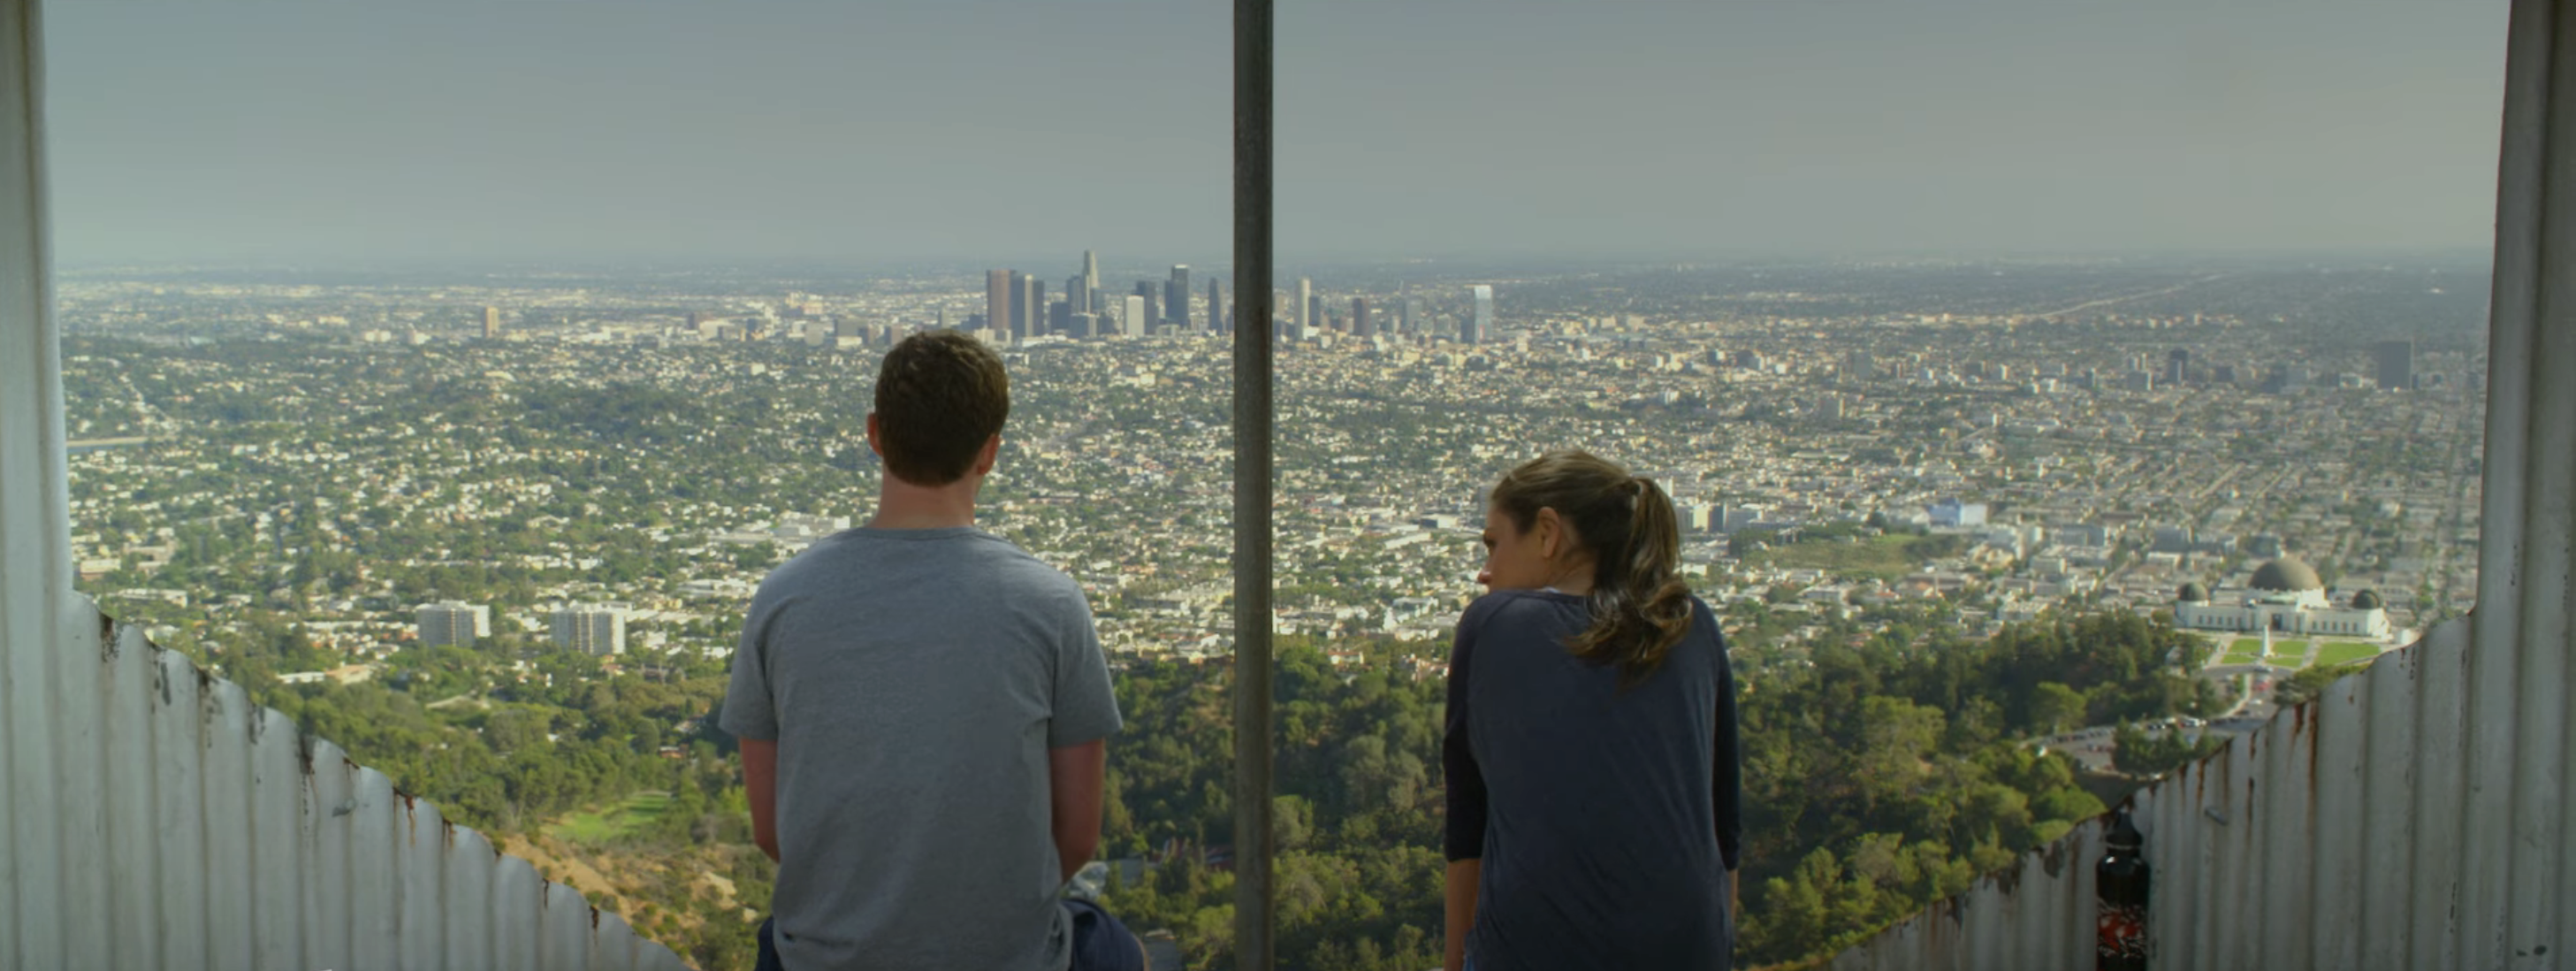 Two people looking out at the Los Angeles skyline